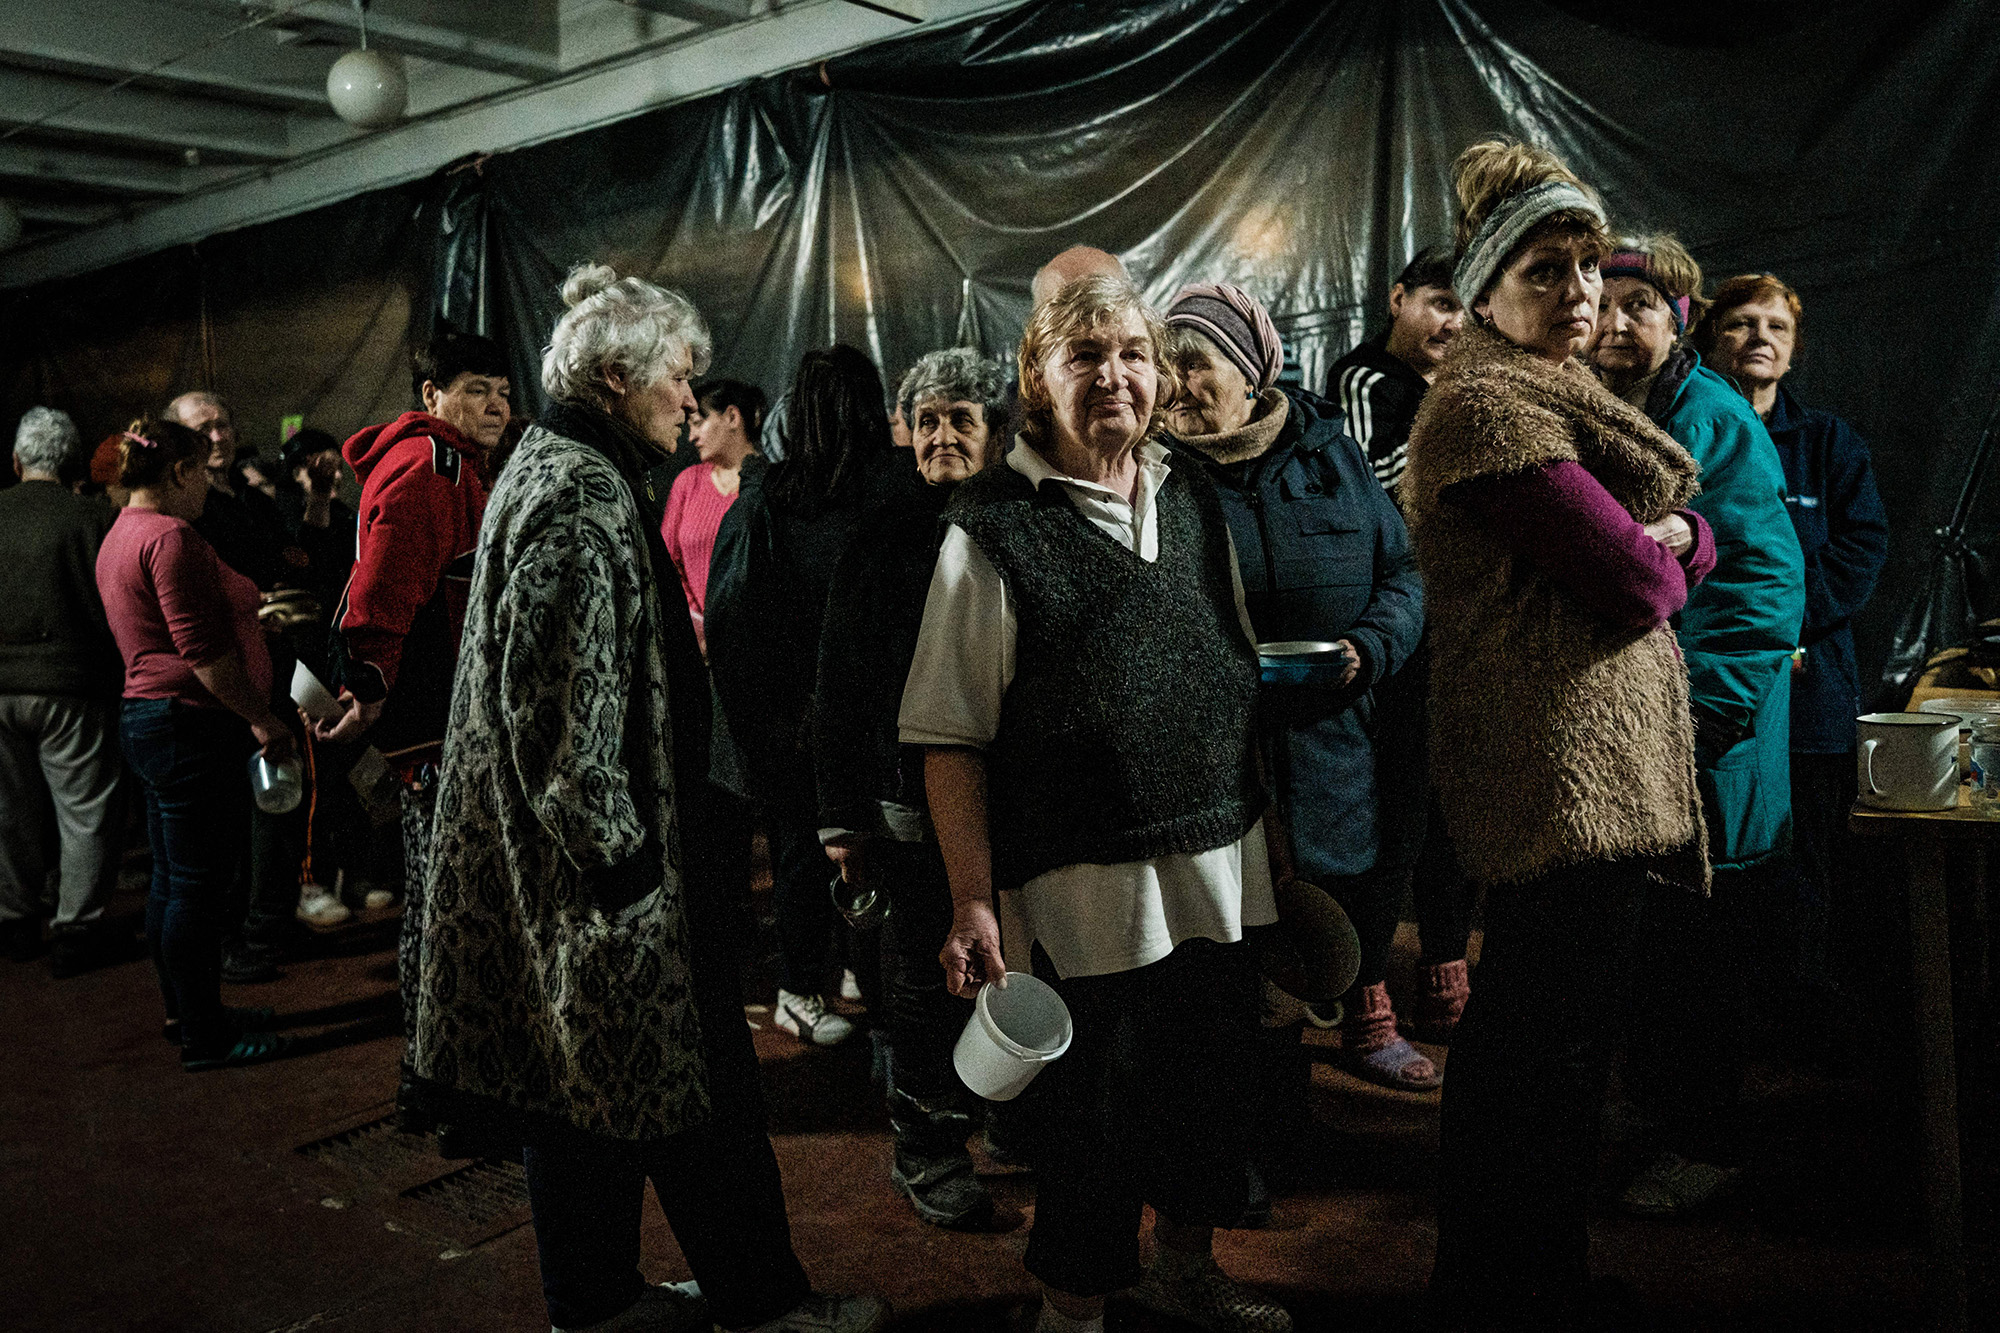 Internally displaced people wait for food distribution in a bunker at a factory in Severodonetsk, eastern Ukraine, on April 22.